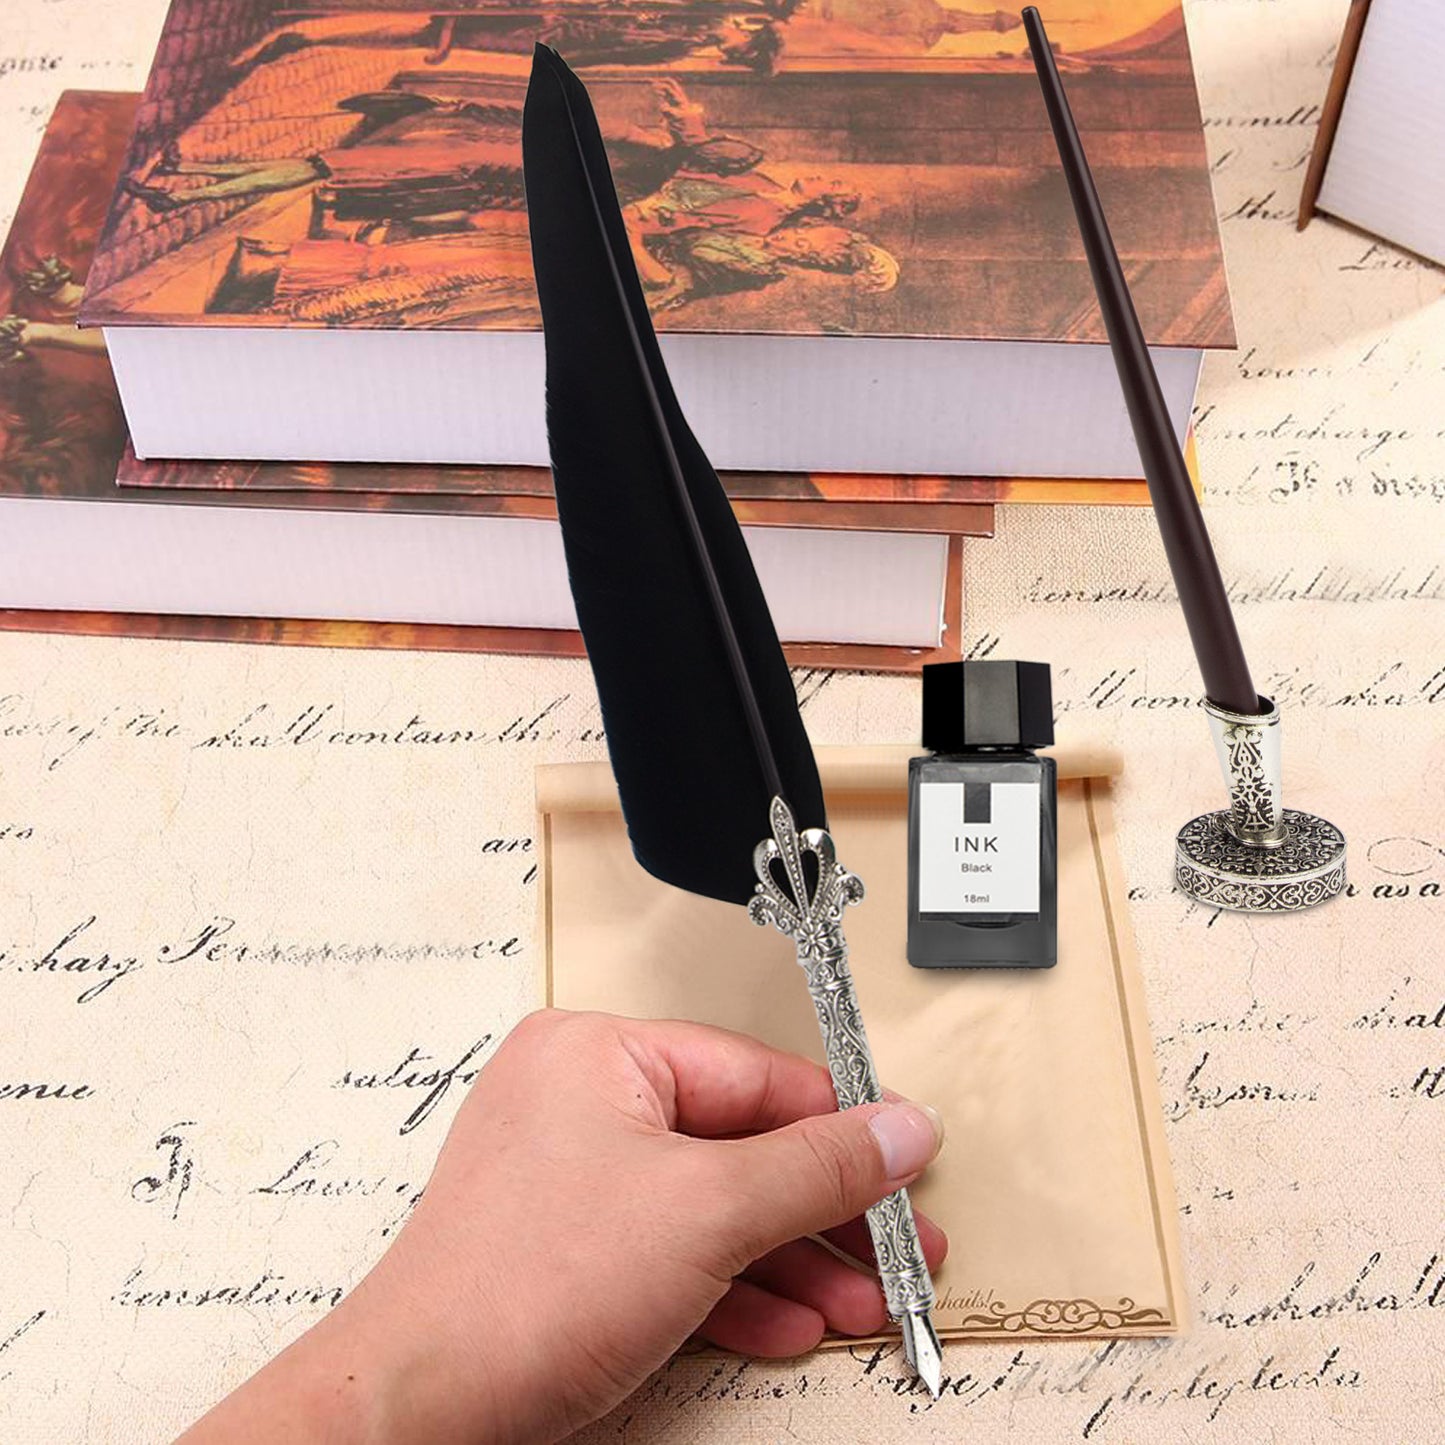 Calligraphy Set For Beginners, Calligraphy Pens for beginners, Calligraphy Pen Set, Calligraphy Kit for Beginners, feather pen, quill pen, quill and ink set, quill pen and ink set, Wooden pen and ink